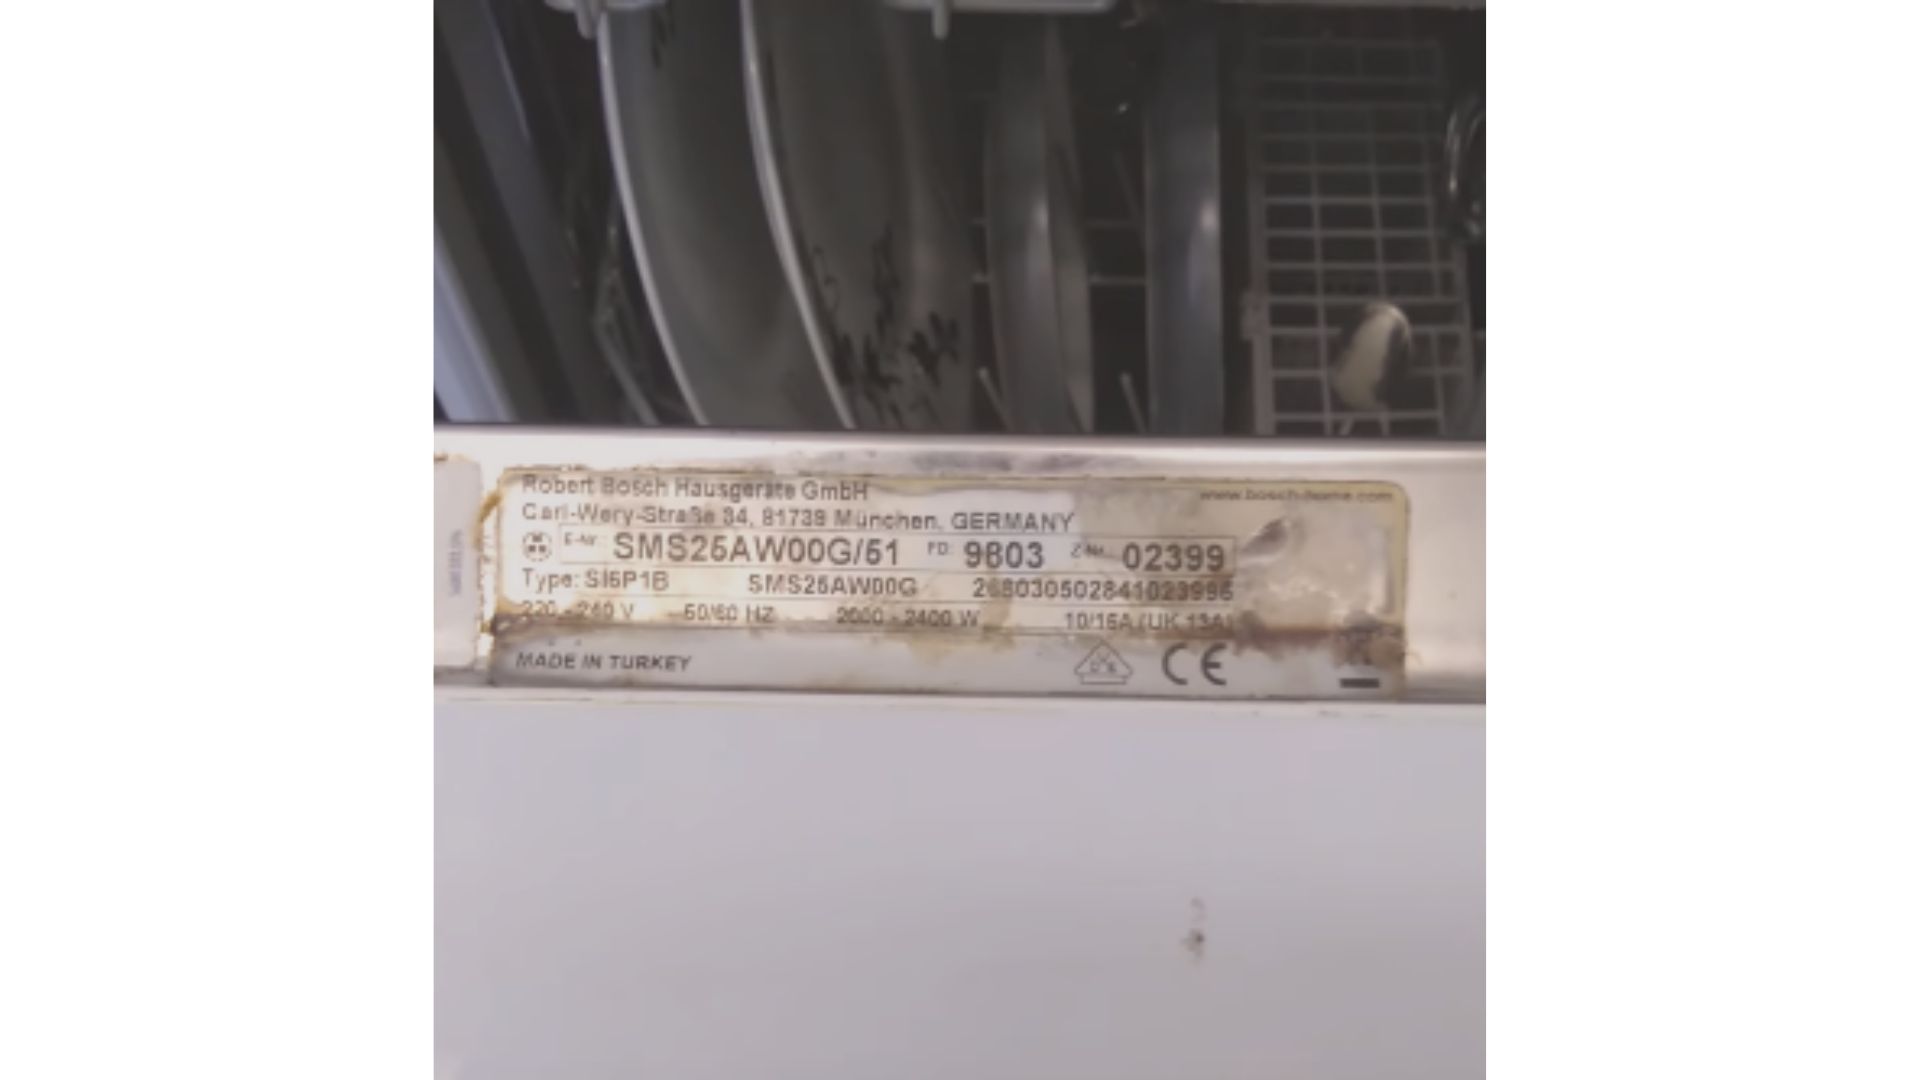 what do bosch dishwasher model numbers mean